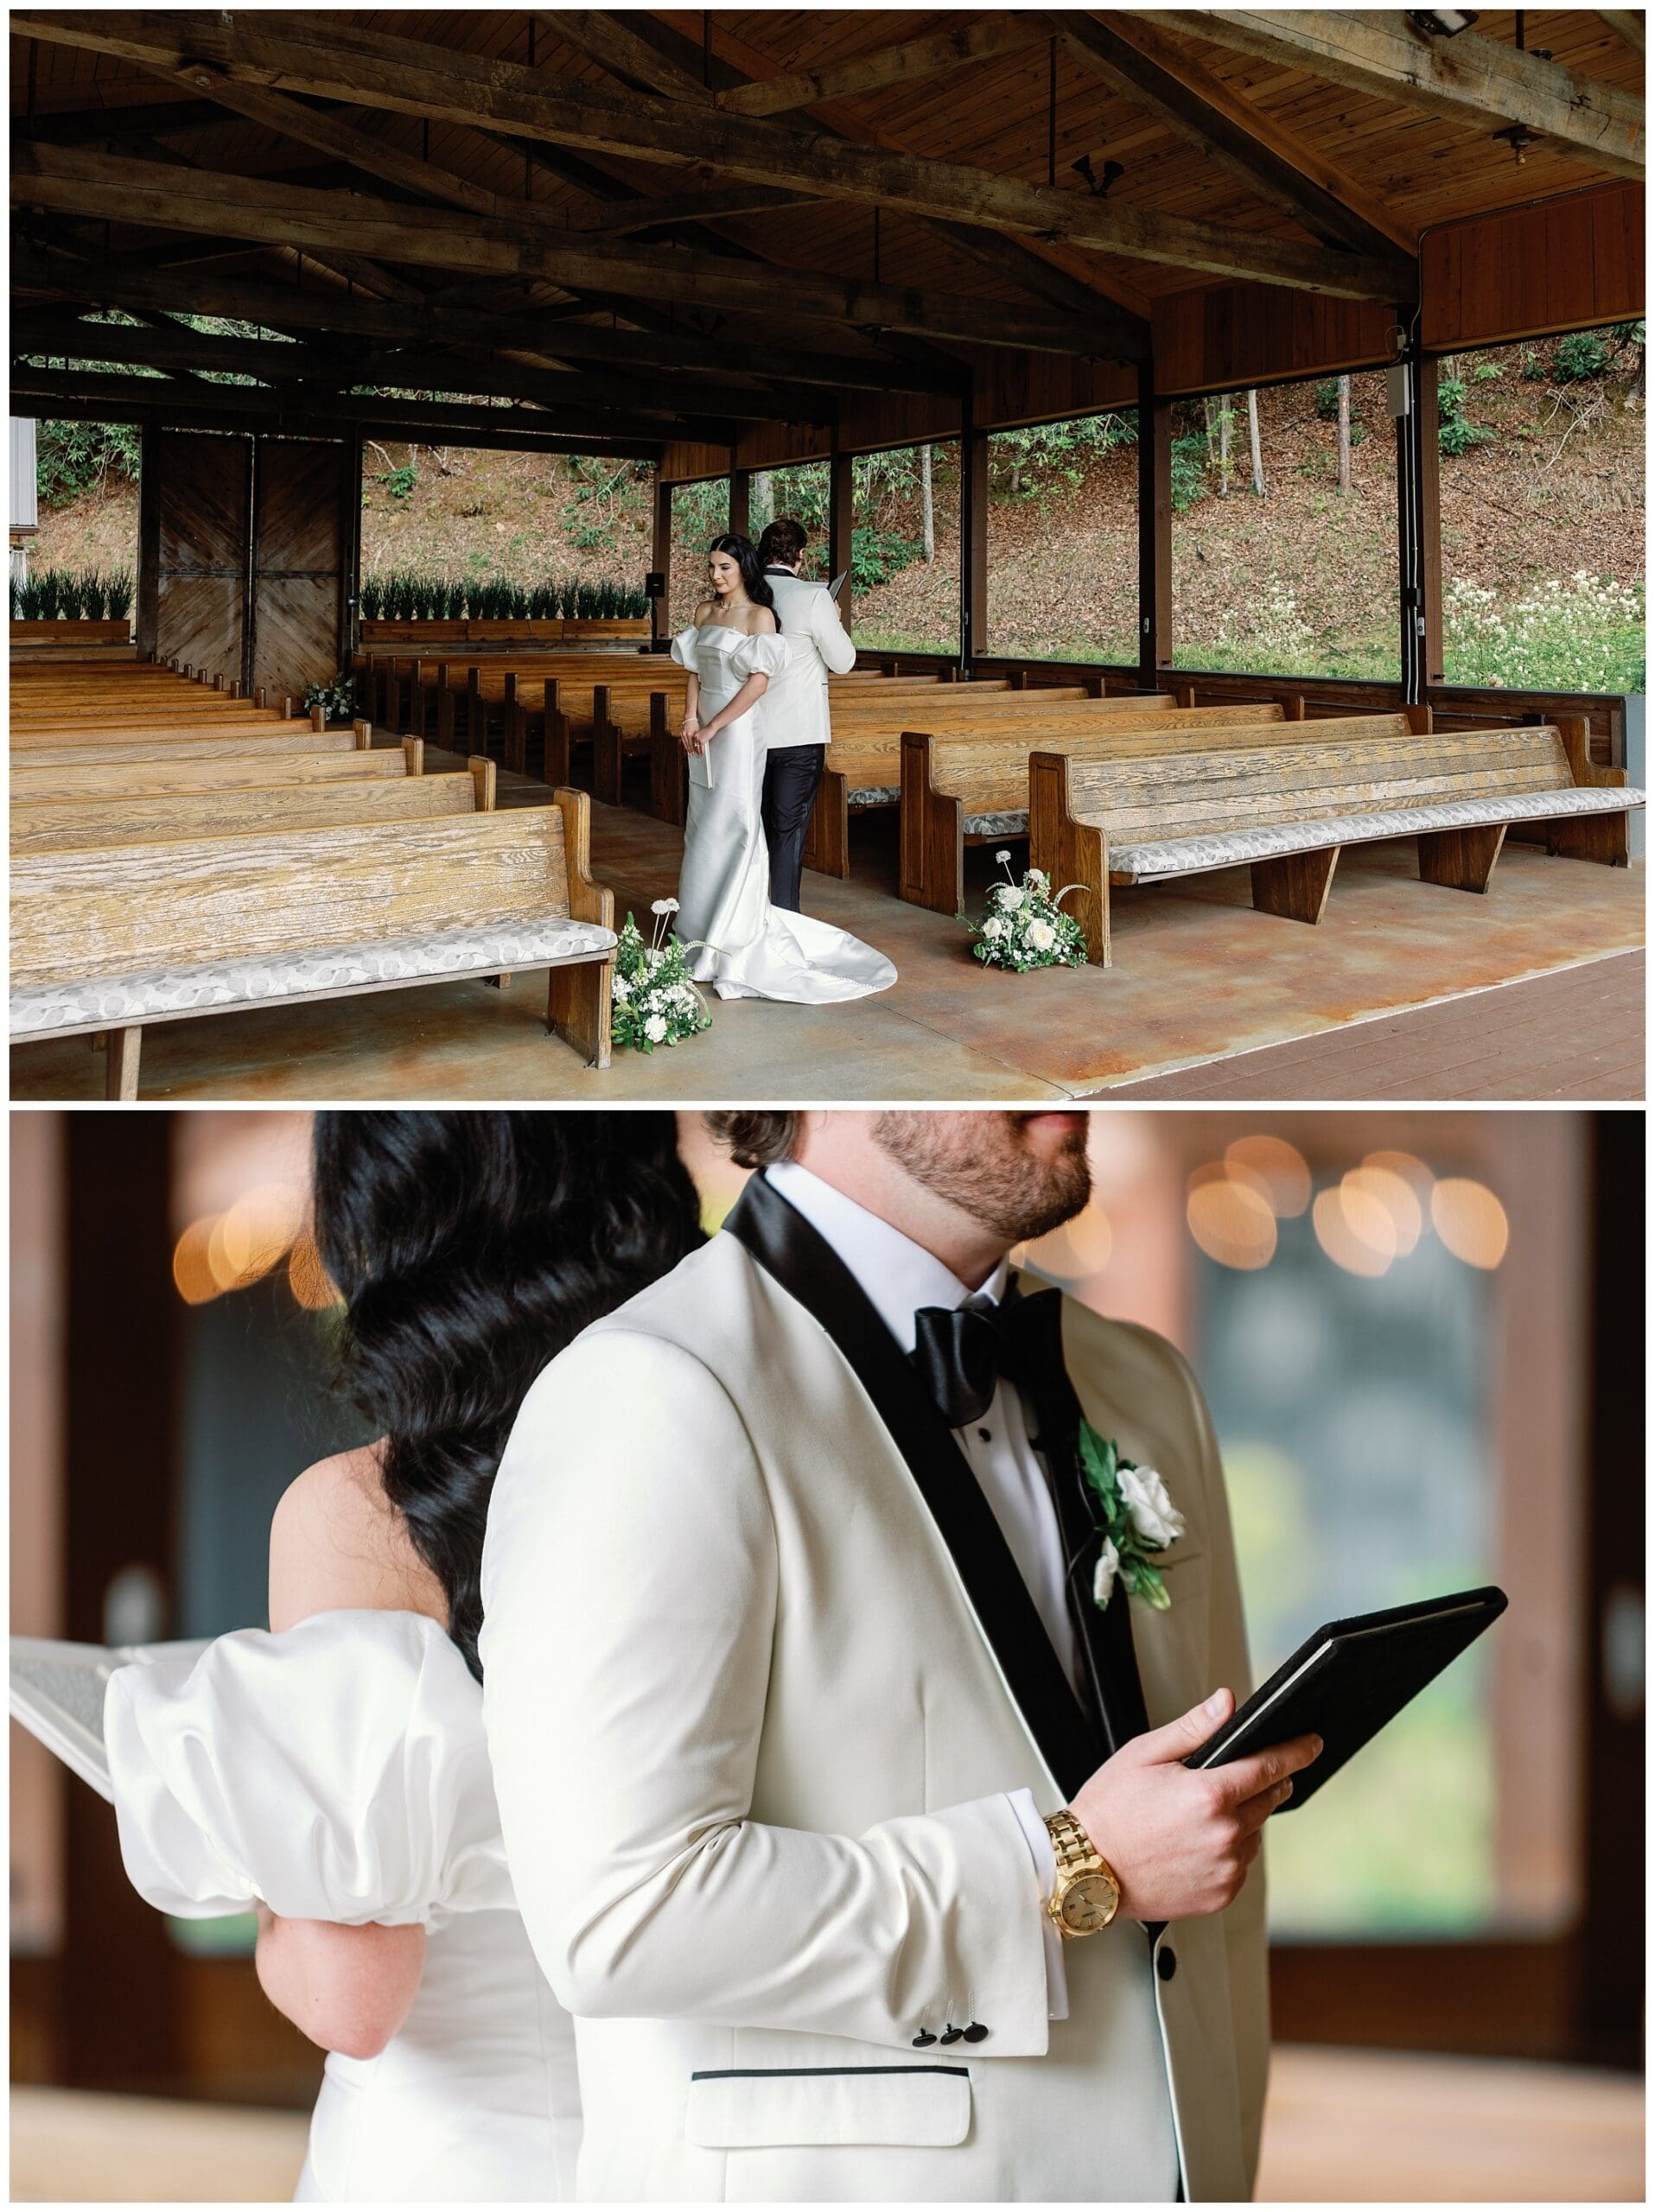 A wedding couple embraces on a wooden pavilion with large windows, and a close-up of their hands reading a tablet, highlighting the groom's watch and the bride's white dress.